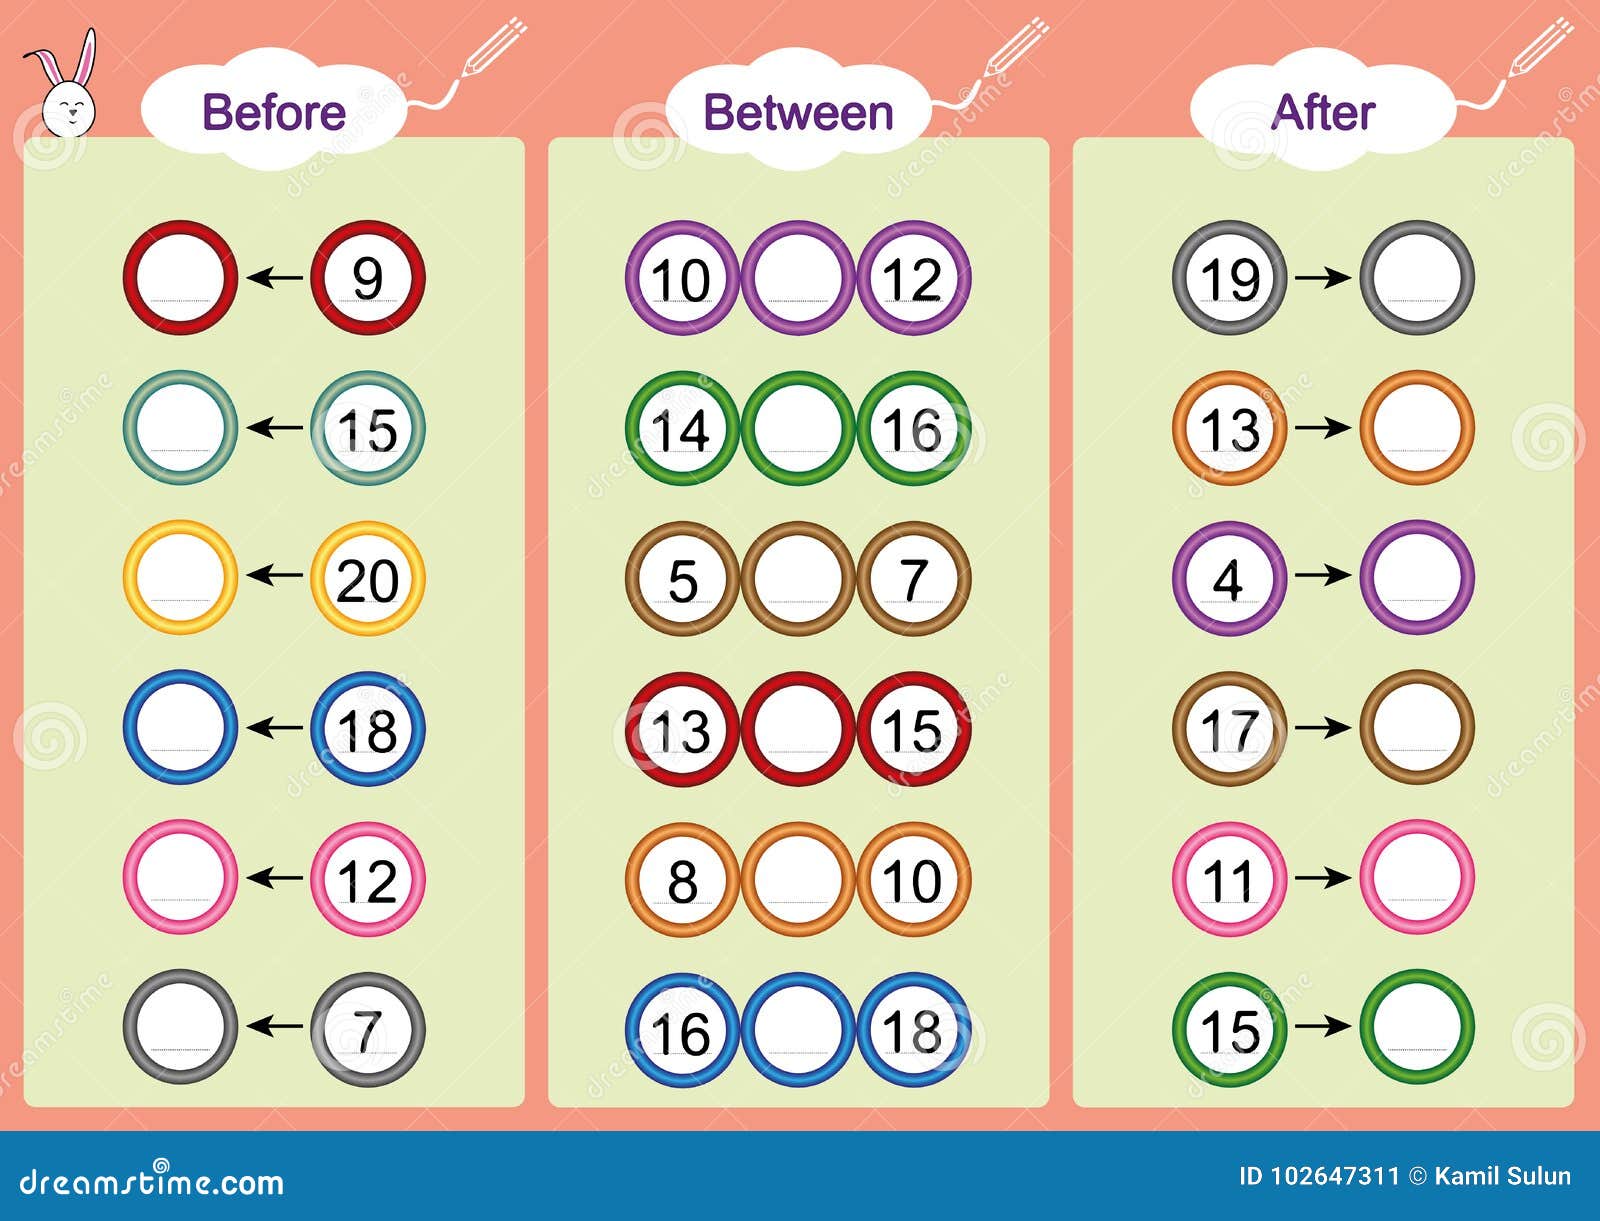 what comes before-between and after, math worksheets for kids